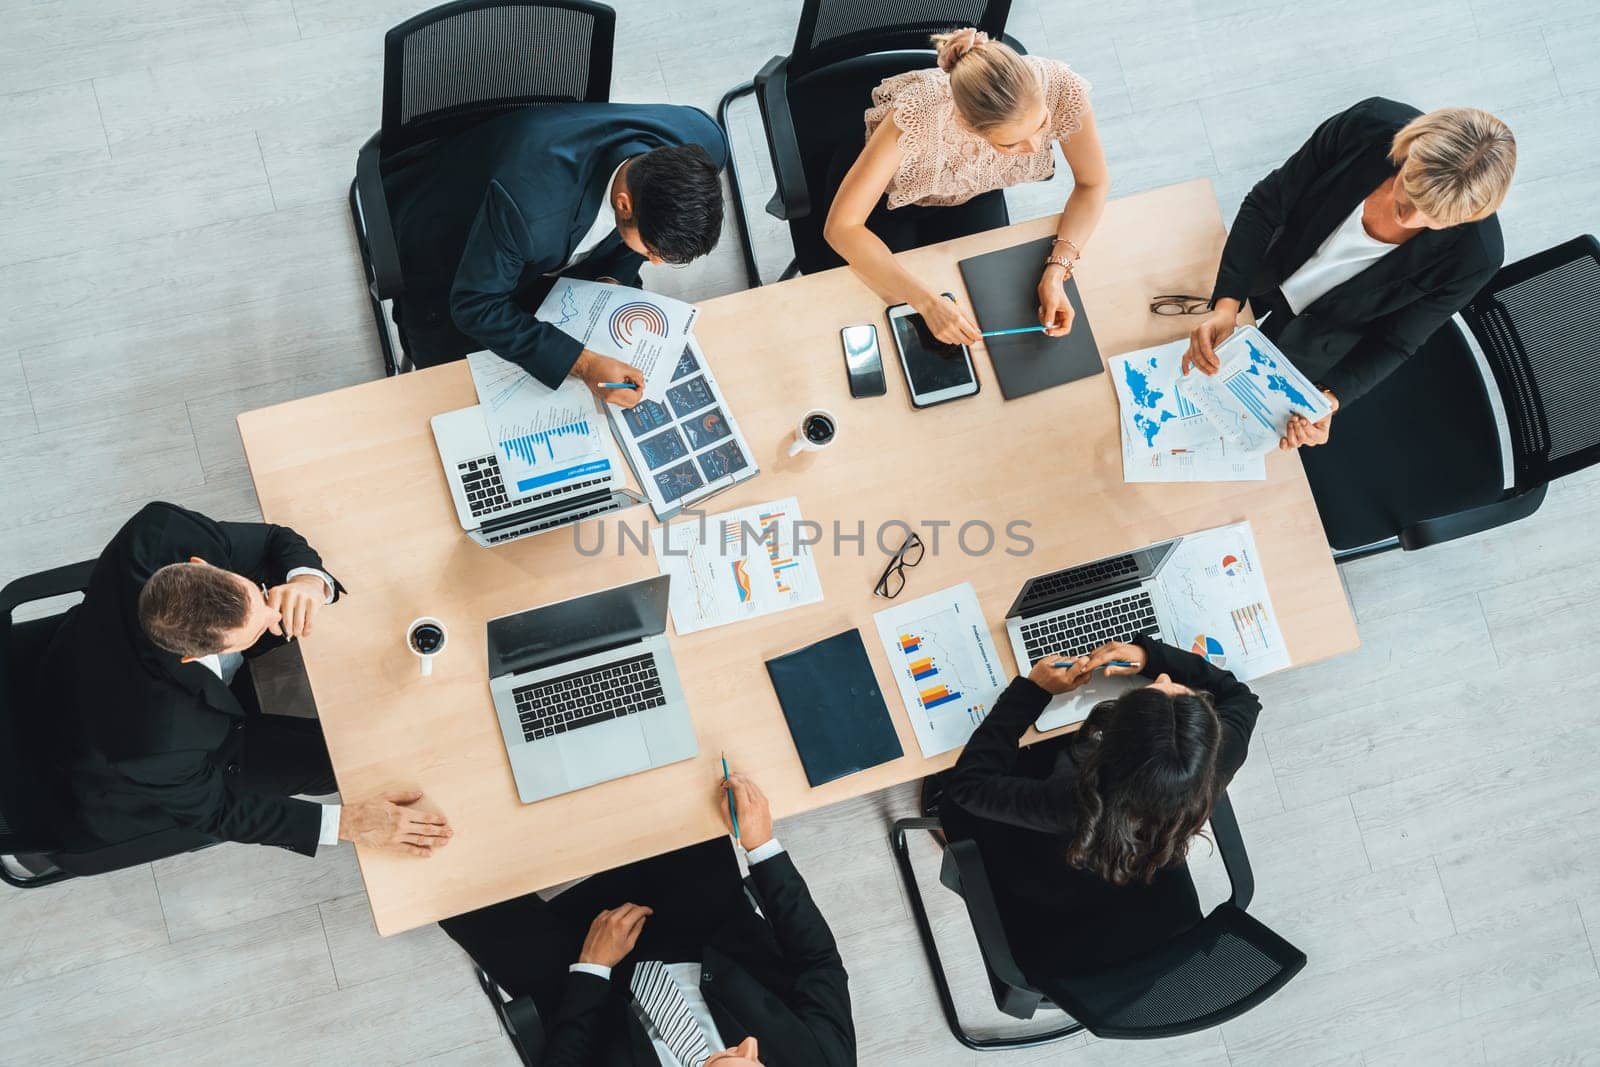 Business people group meeting shot from top view in office . Profession businesswomen, businessmen and office workers working in team conference with project planning document on meeting table . Jivy